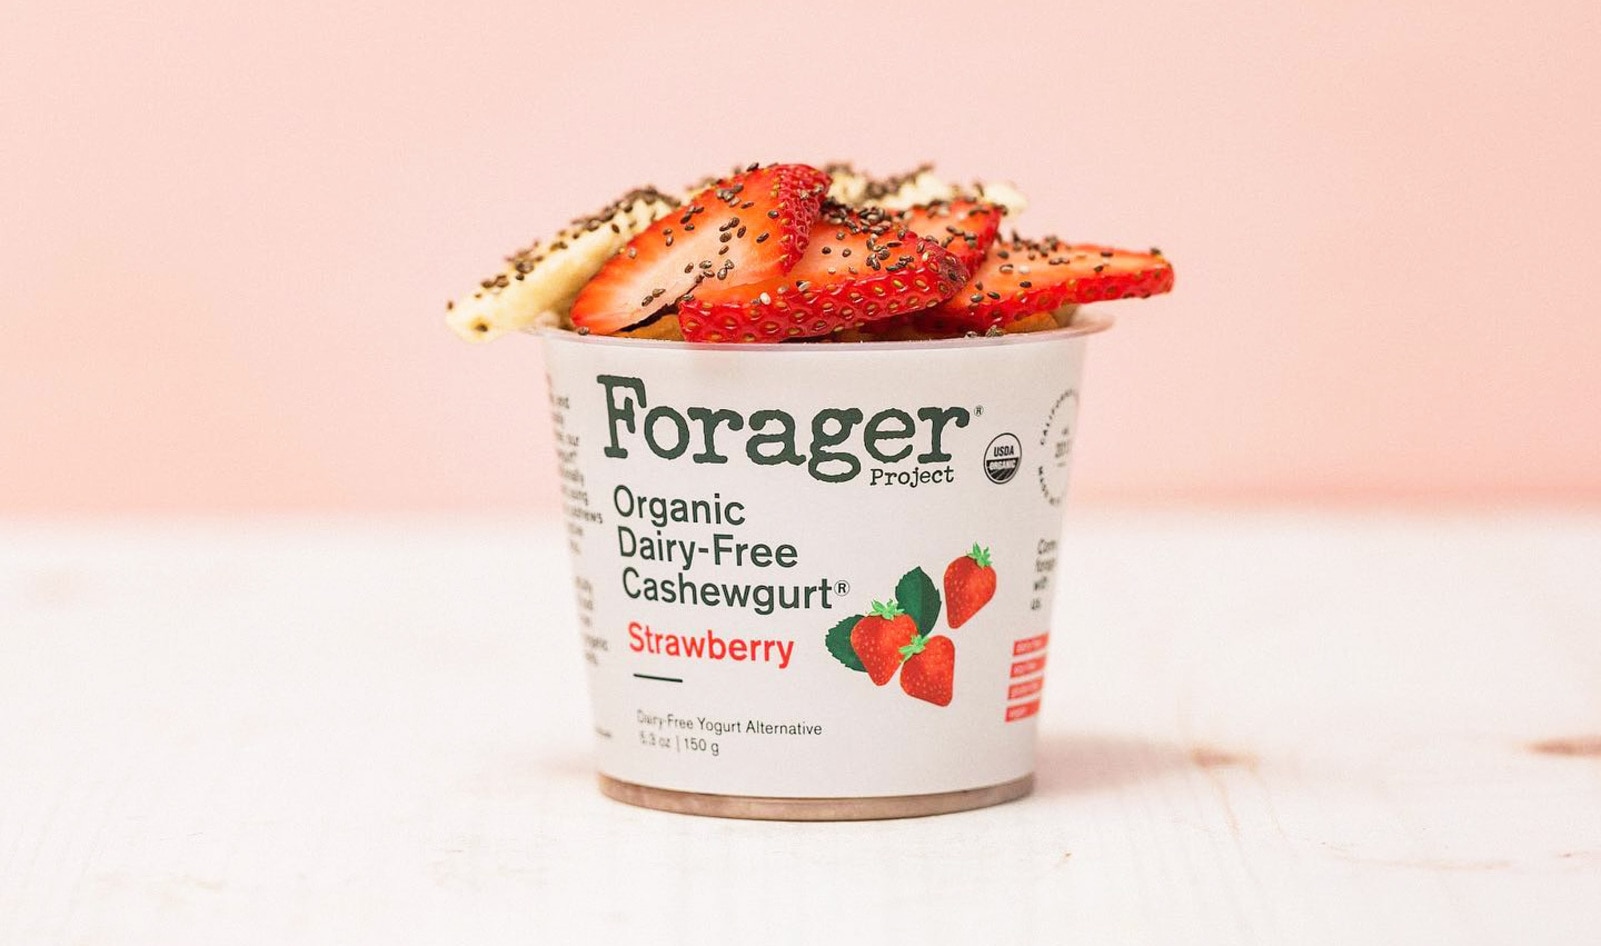 Forager Project Donates $350,000 Worth of Vegan Meals to Food Banks for COVID-19 Relief&nbsp;